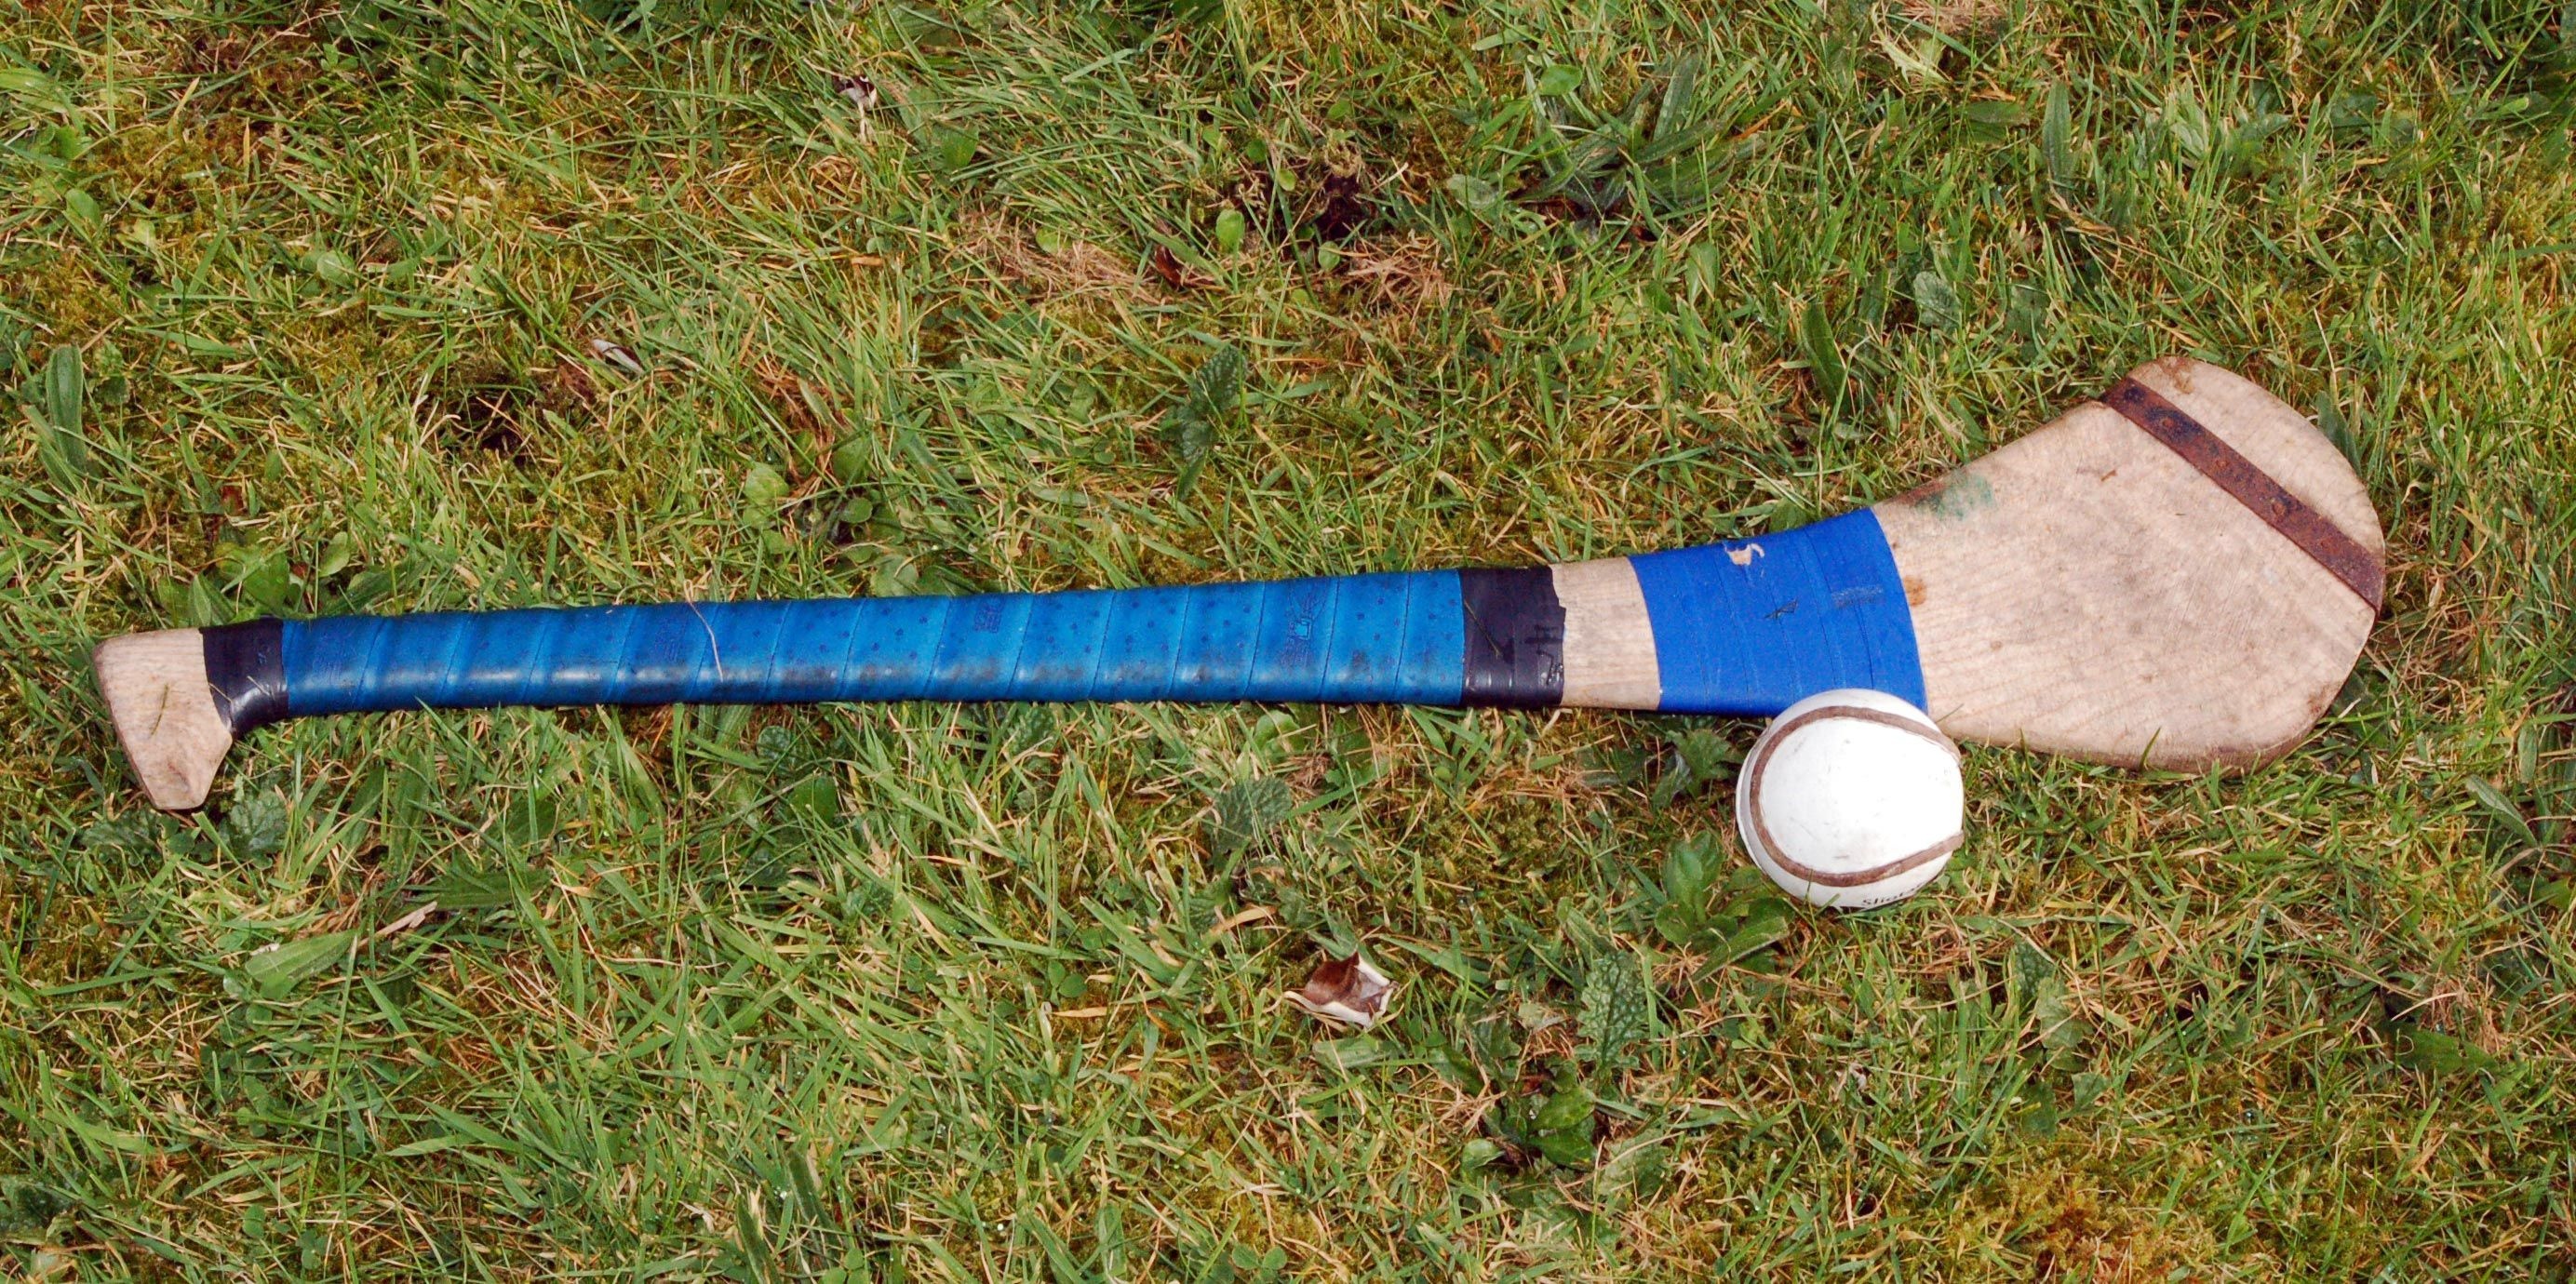 Hurling: An ash wood stick called a hurley and a small ball called a sliotar. 2770x1380 Dual Screen Background.